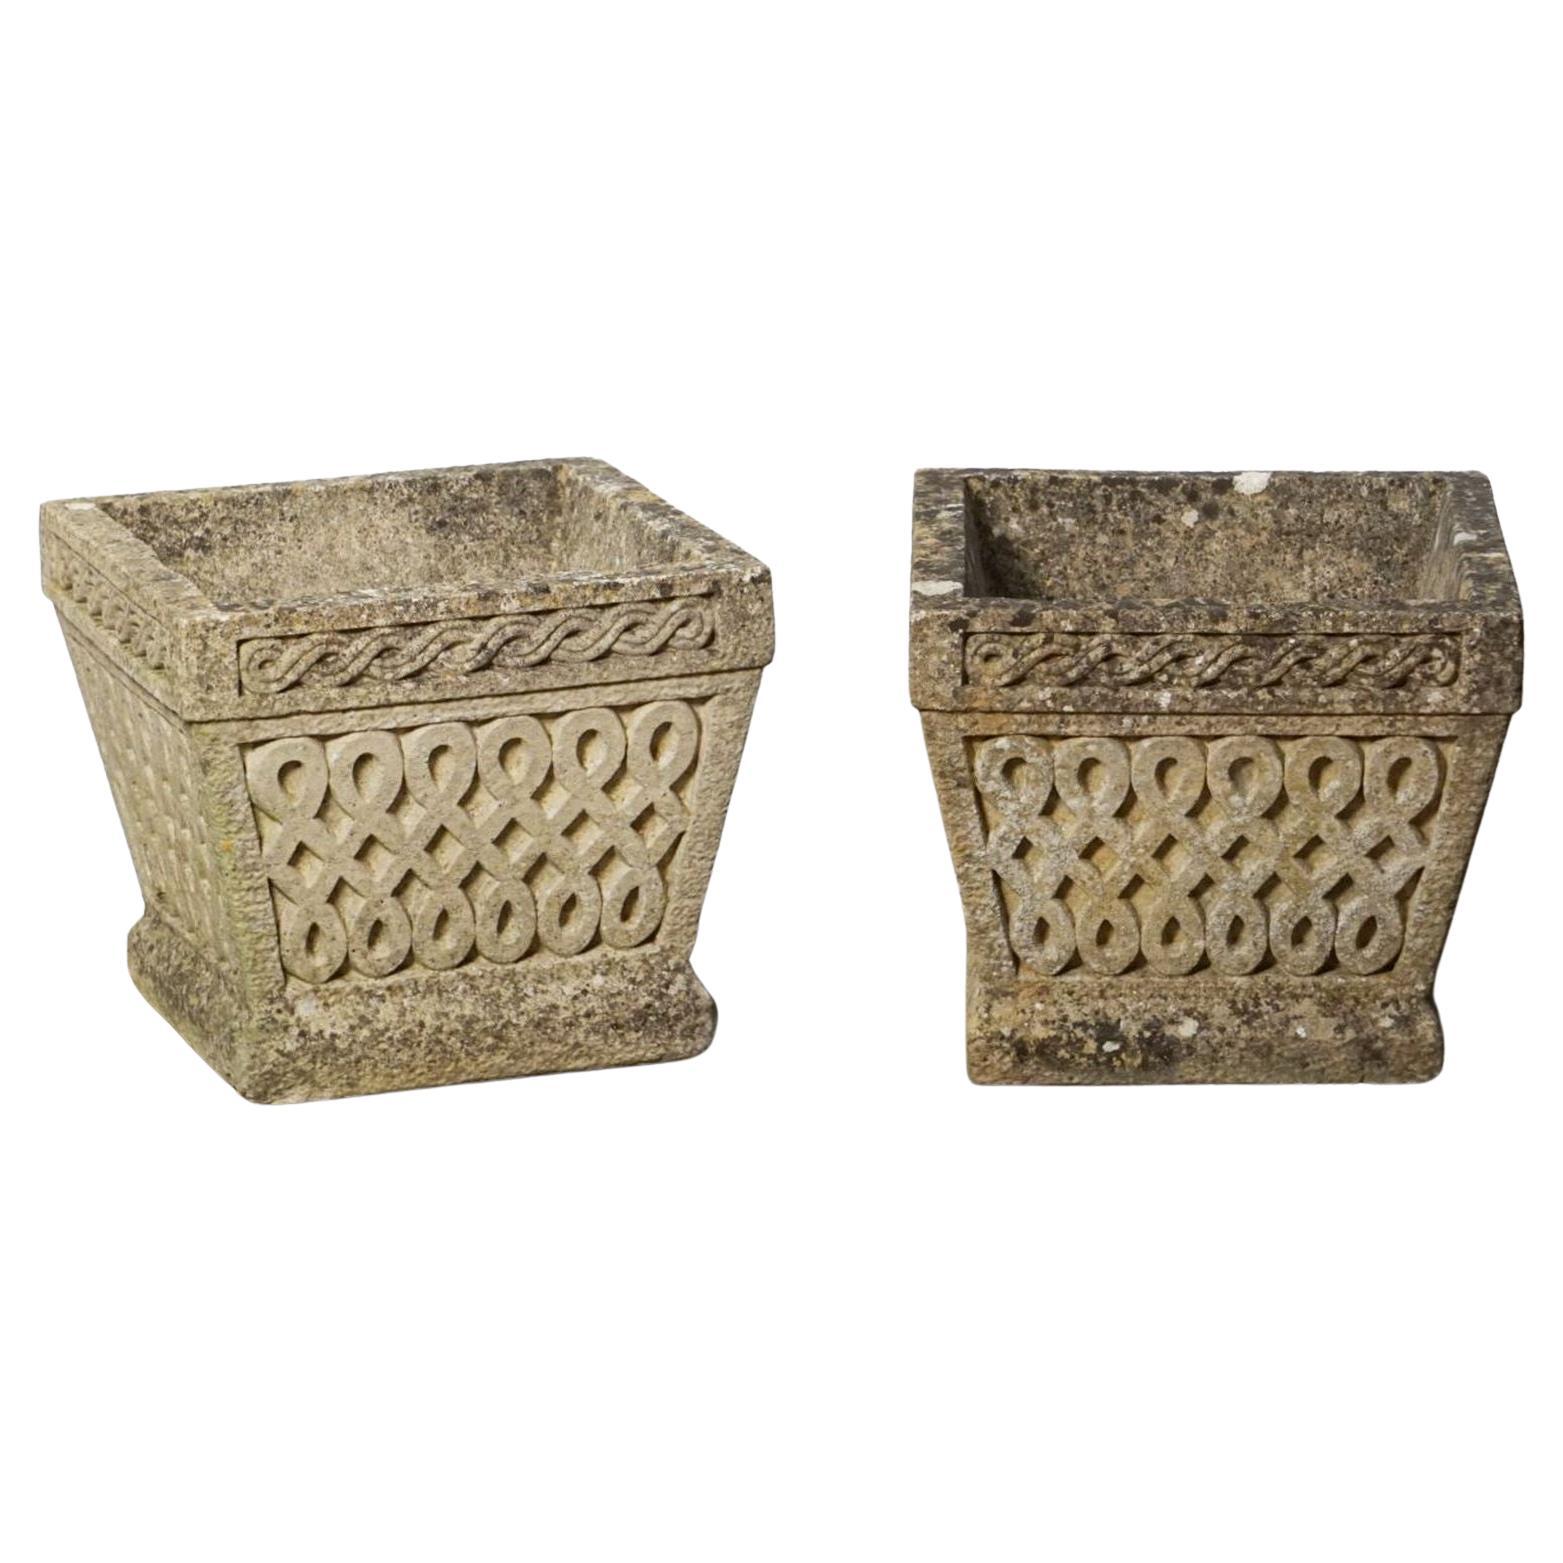 Cotswold Studio Celtic Knot Garden Stone Square Planters or Pots from England For Sale